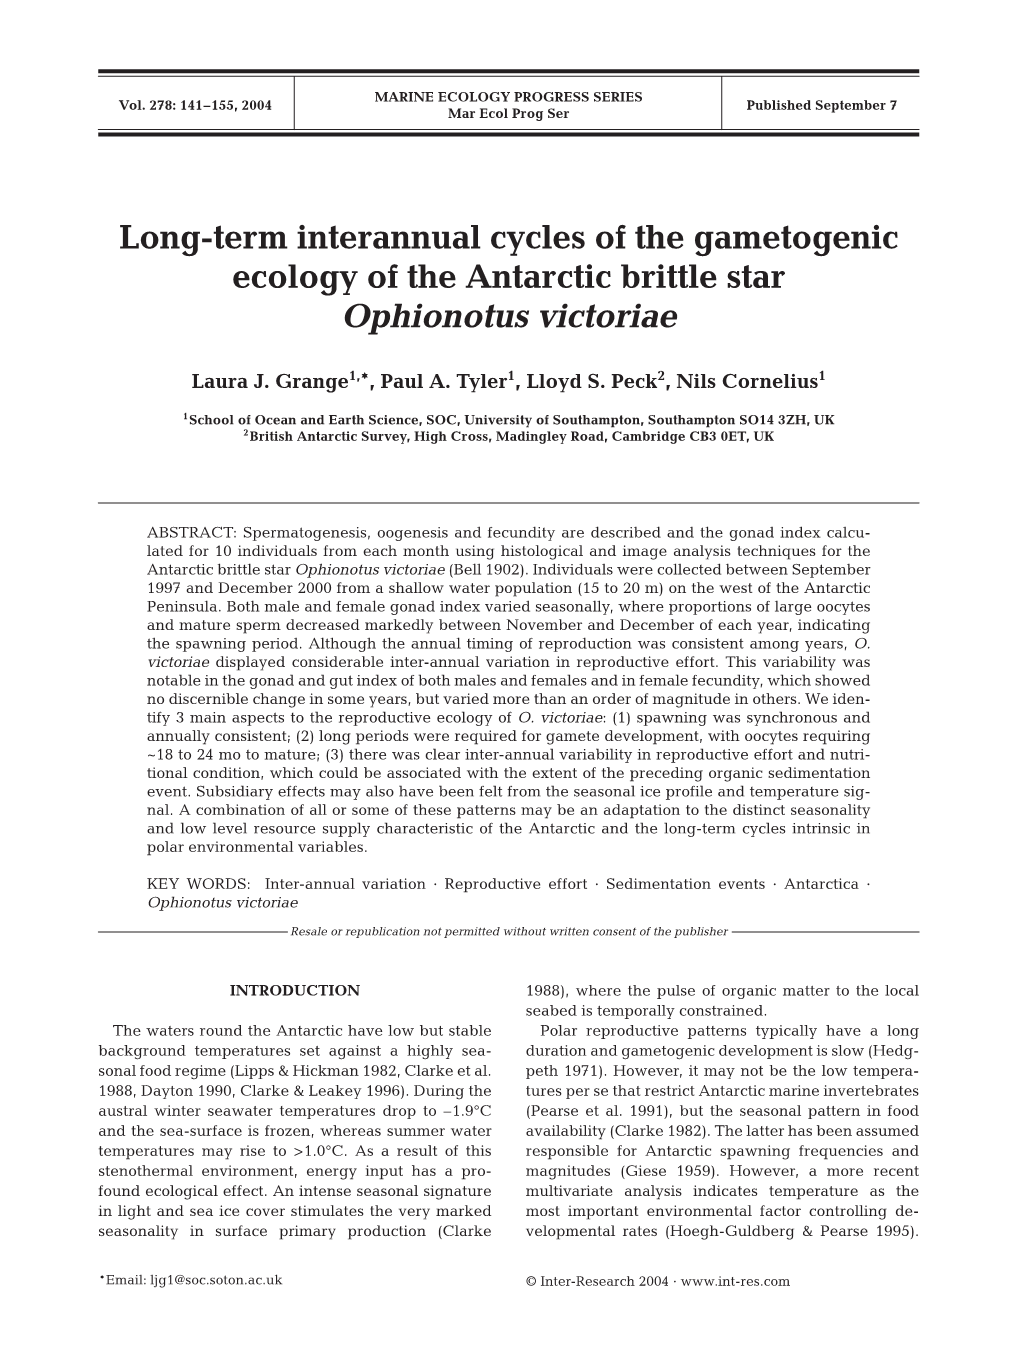 Long-Term Interannual Cycles of the Gametogenic Ecology of the Antarctic Brittle Star Ophionotus Victoriae